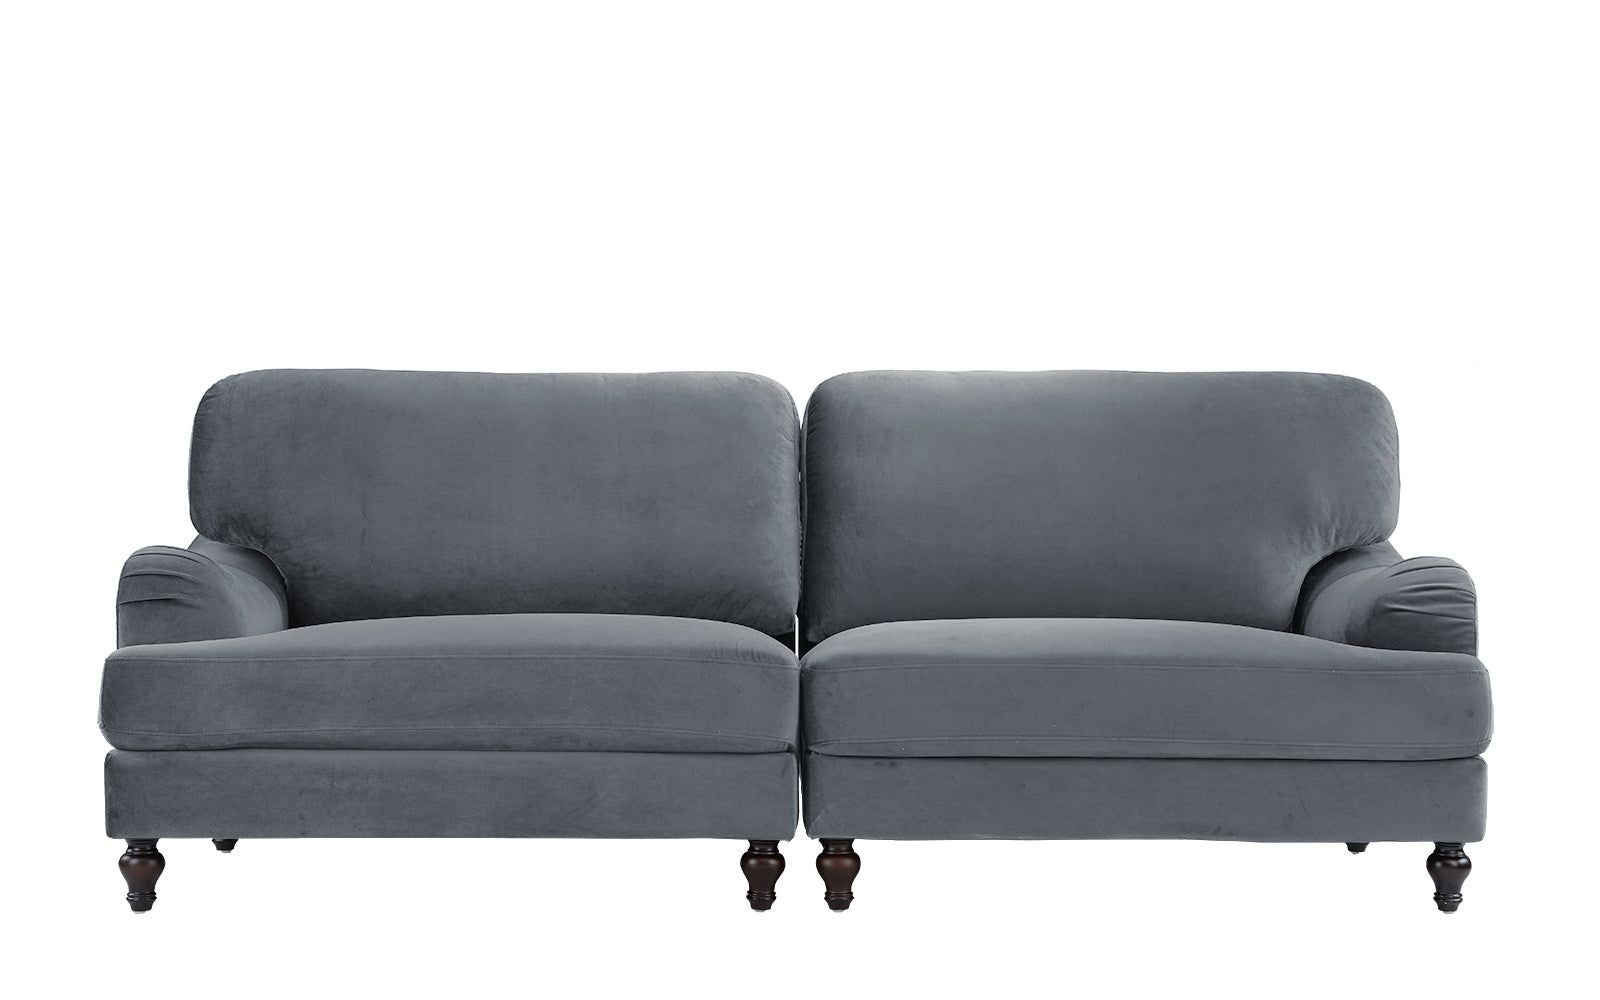 Nile (2) Piece Convertible Velvet Sofa | Sofamania | Reviews On Judge Intended For 66" Convertible Velvet Sofa Beds (View 15 of 15)